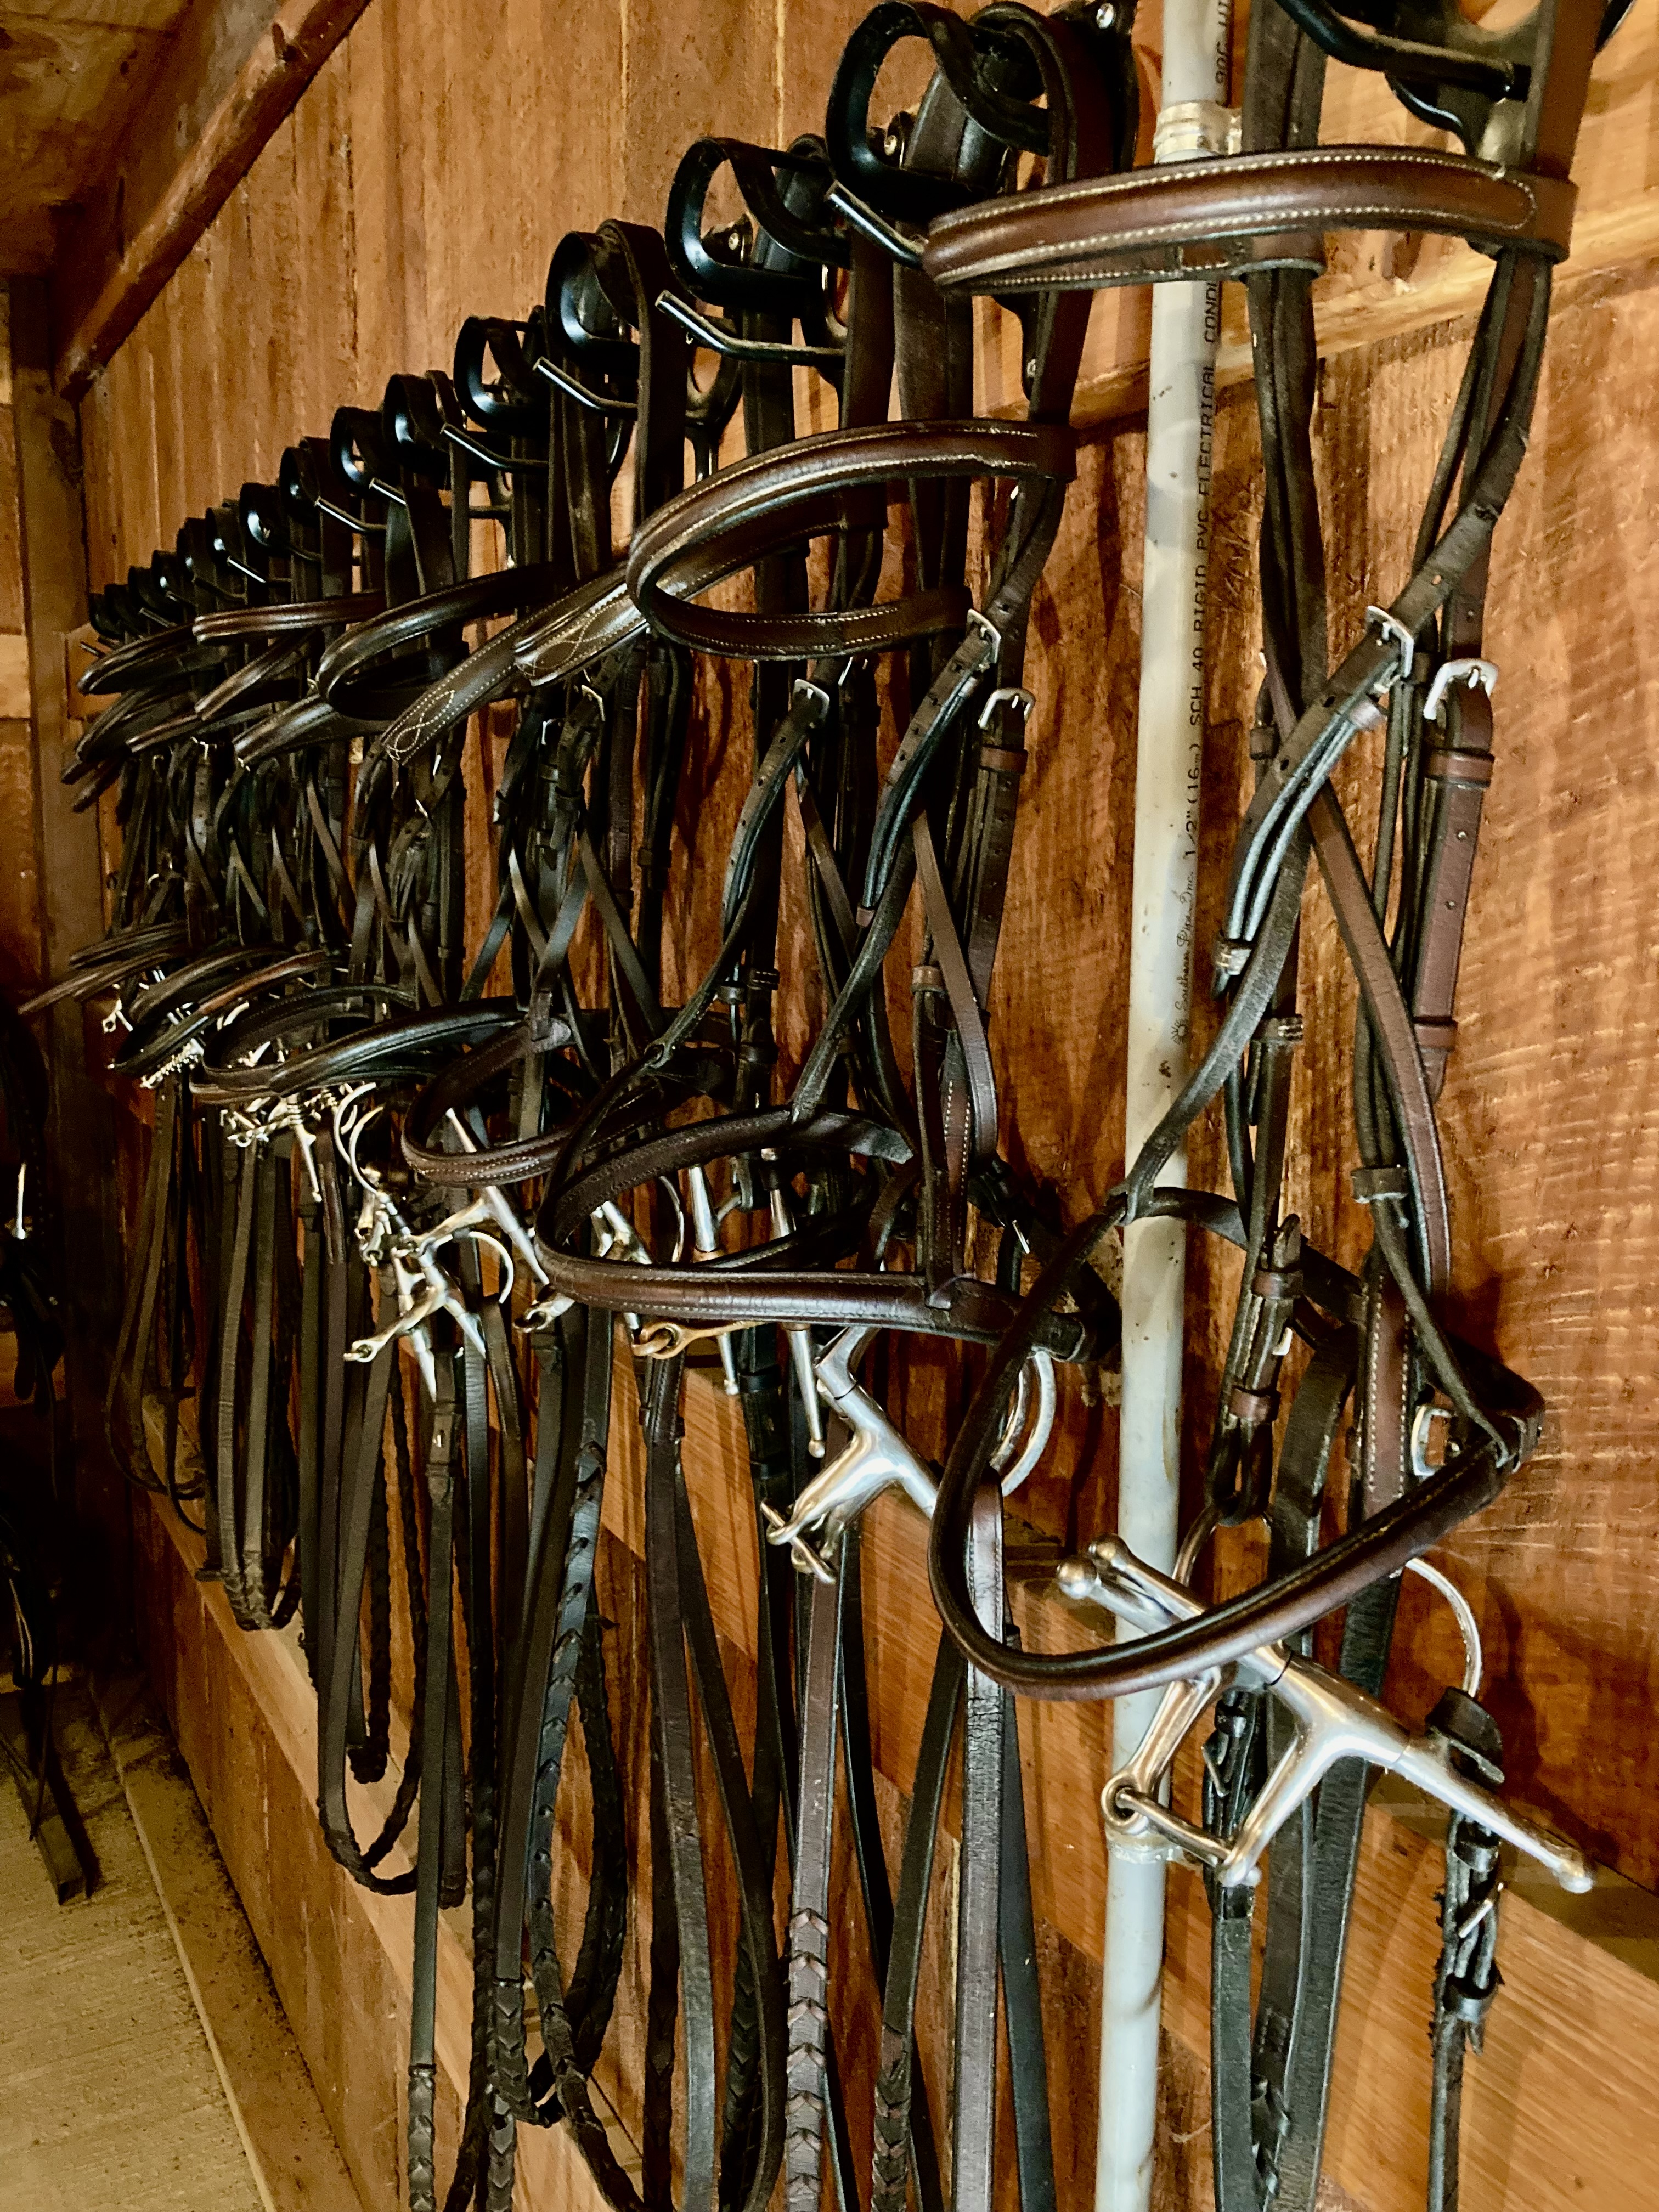 bridles hanging on wall